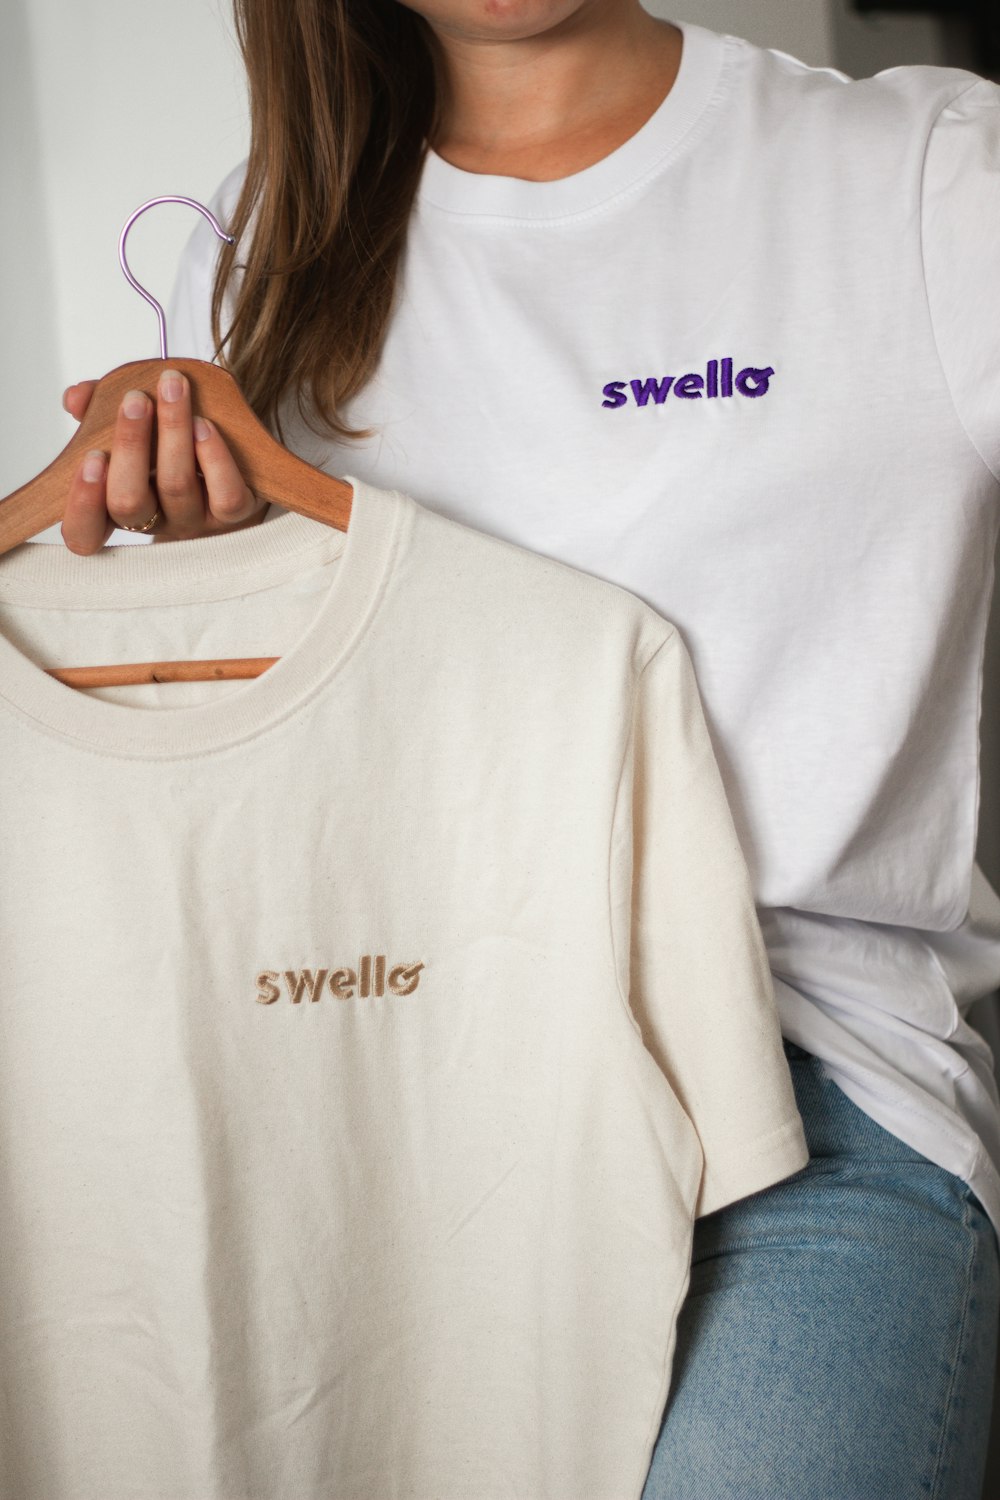 a woman holding a white t - shirt with the word swelllo on it